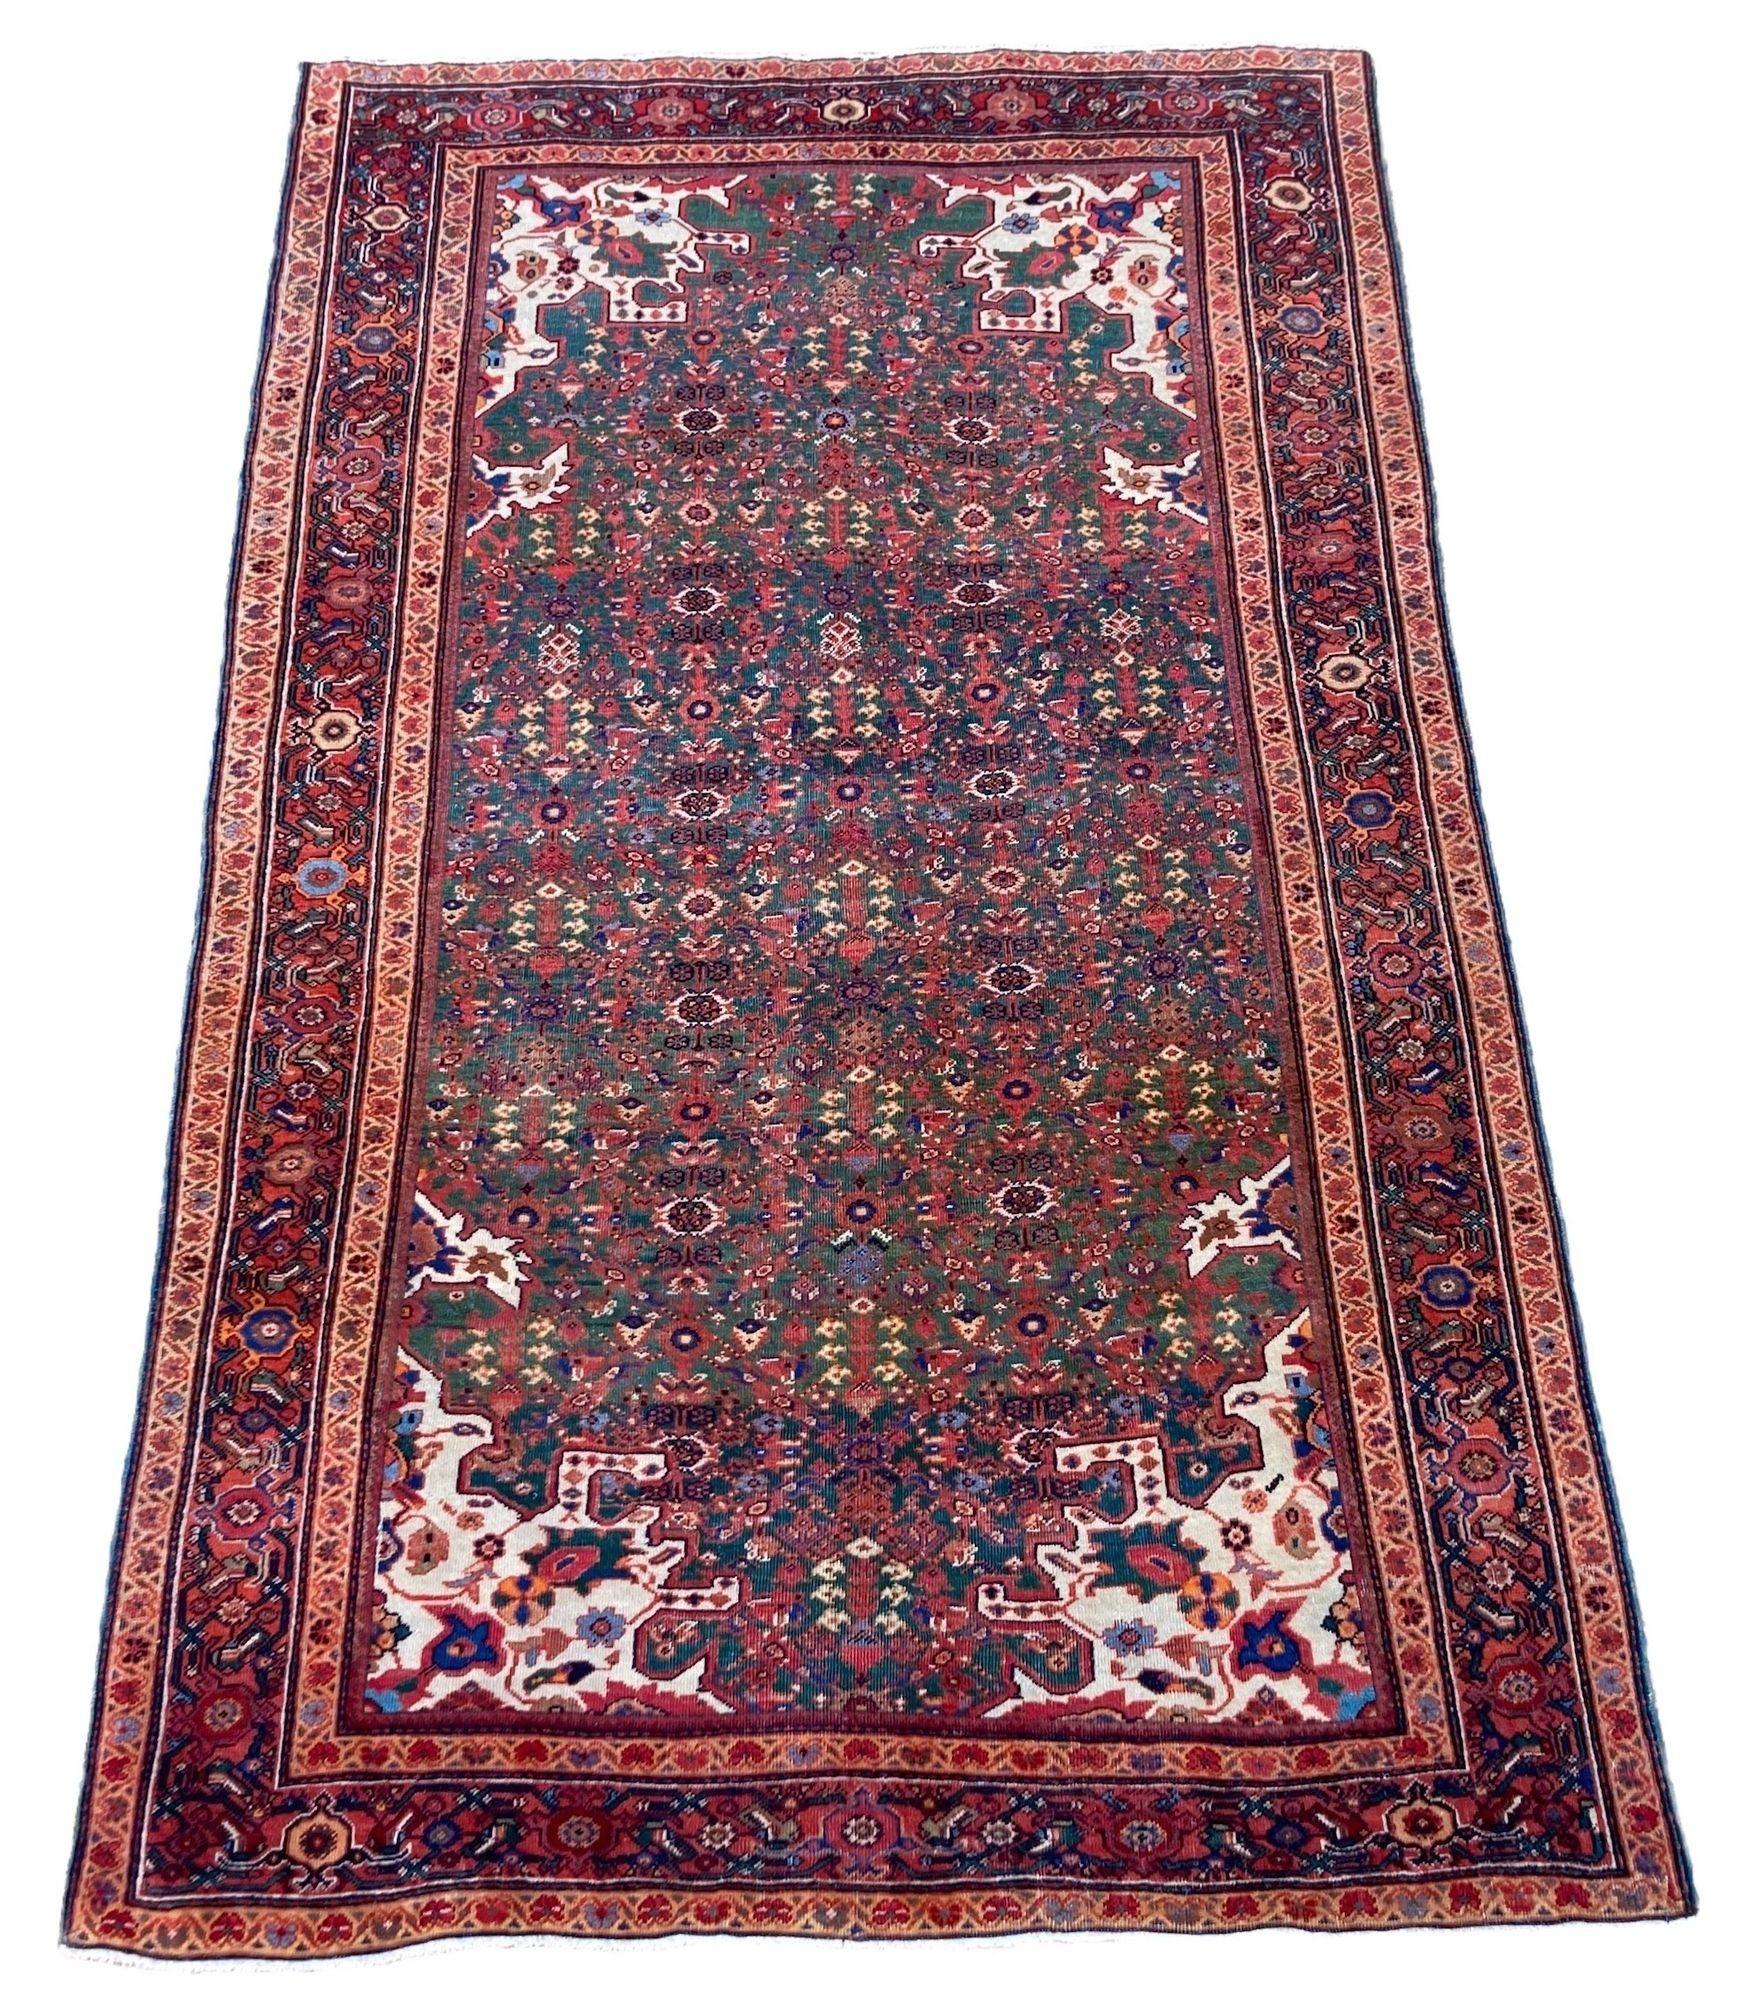 A fabulous antique Mahal rug, handwoven circa 1900 with an all over design on a rare green field, terracotta border and beautiful corner spandrels. Finely woven with great quality wool and marvellous secondary colours.
Size: 2.08m x 1.32m (6ft 10in